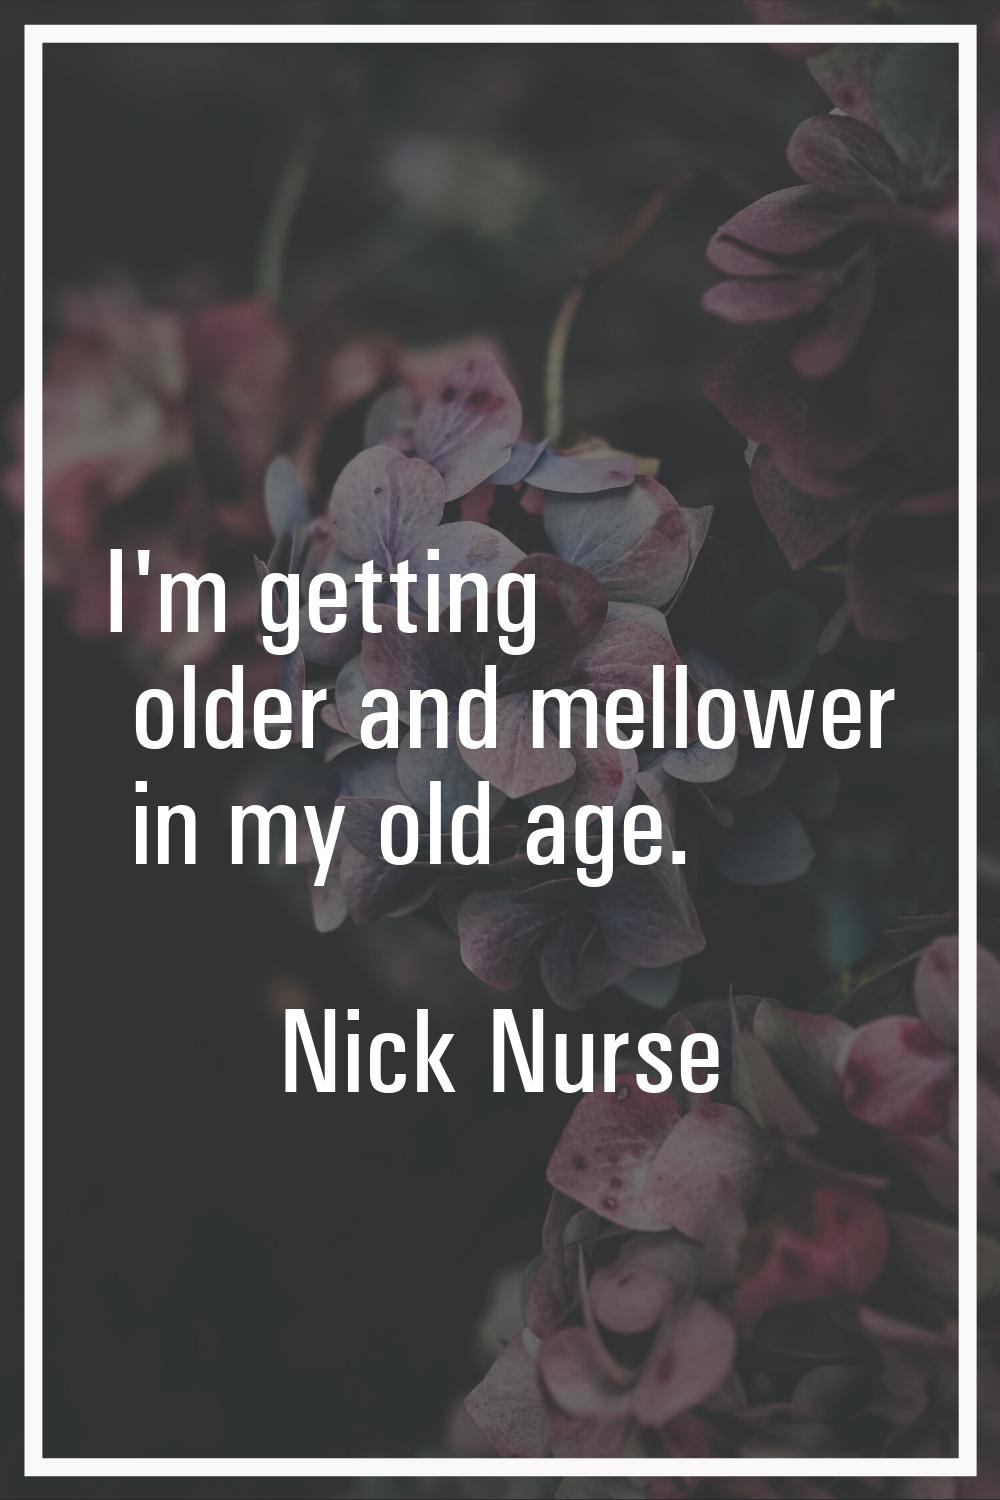 I'm getting older and mellower in my old age.